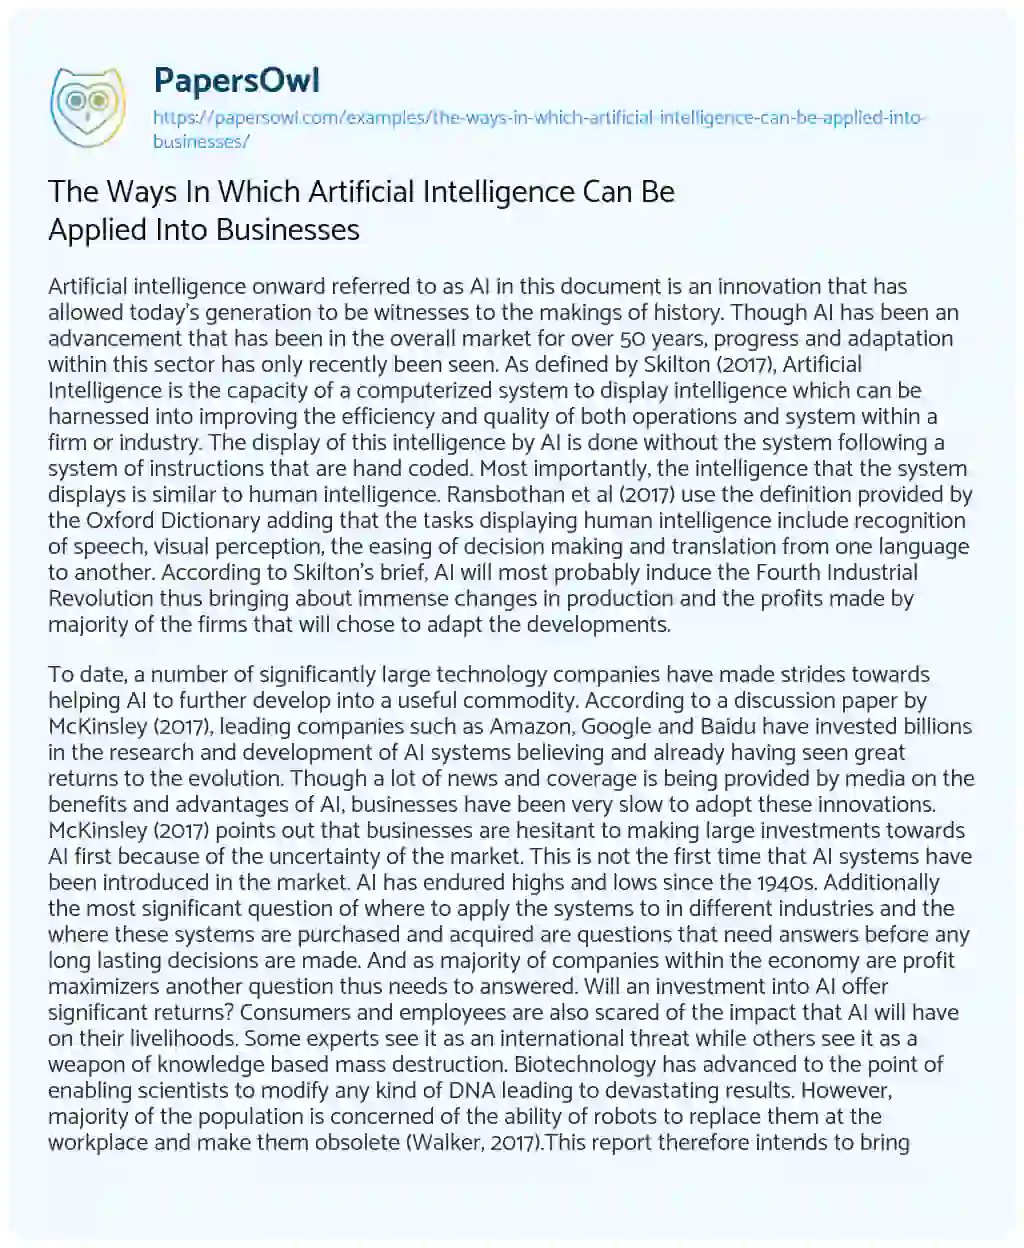 The Ways in which Artificial Intelligence Can be Applied into Businesses essay